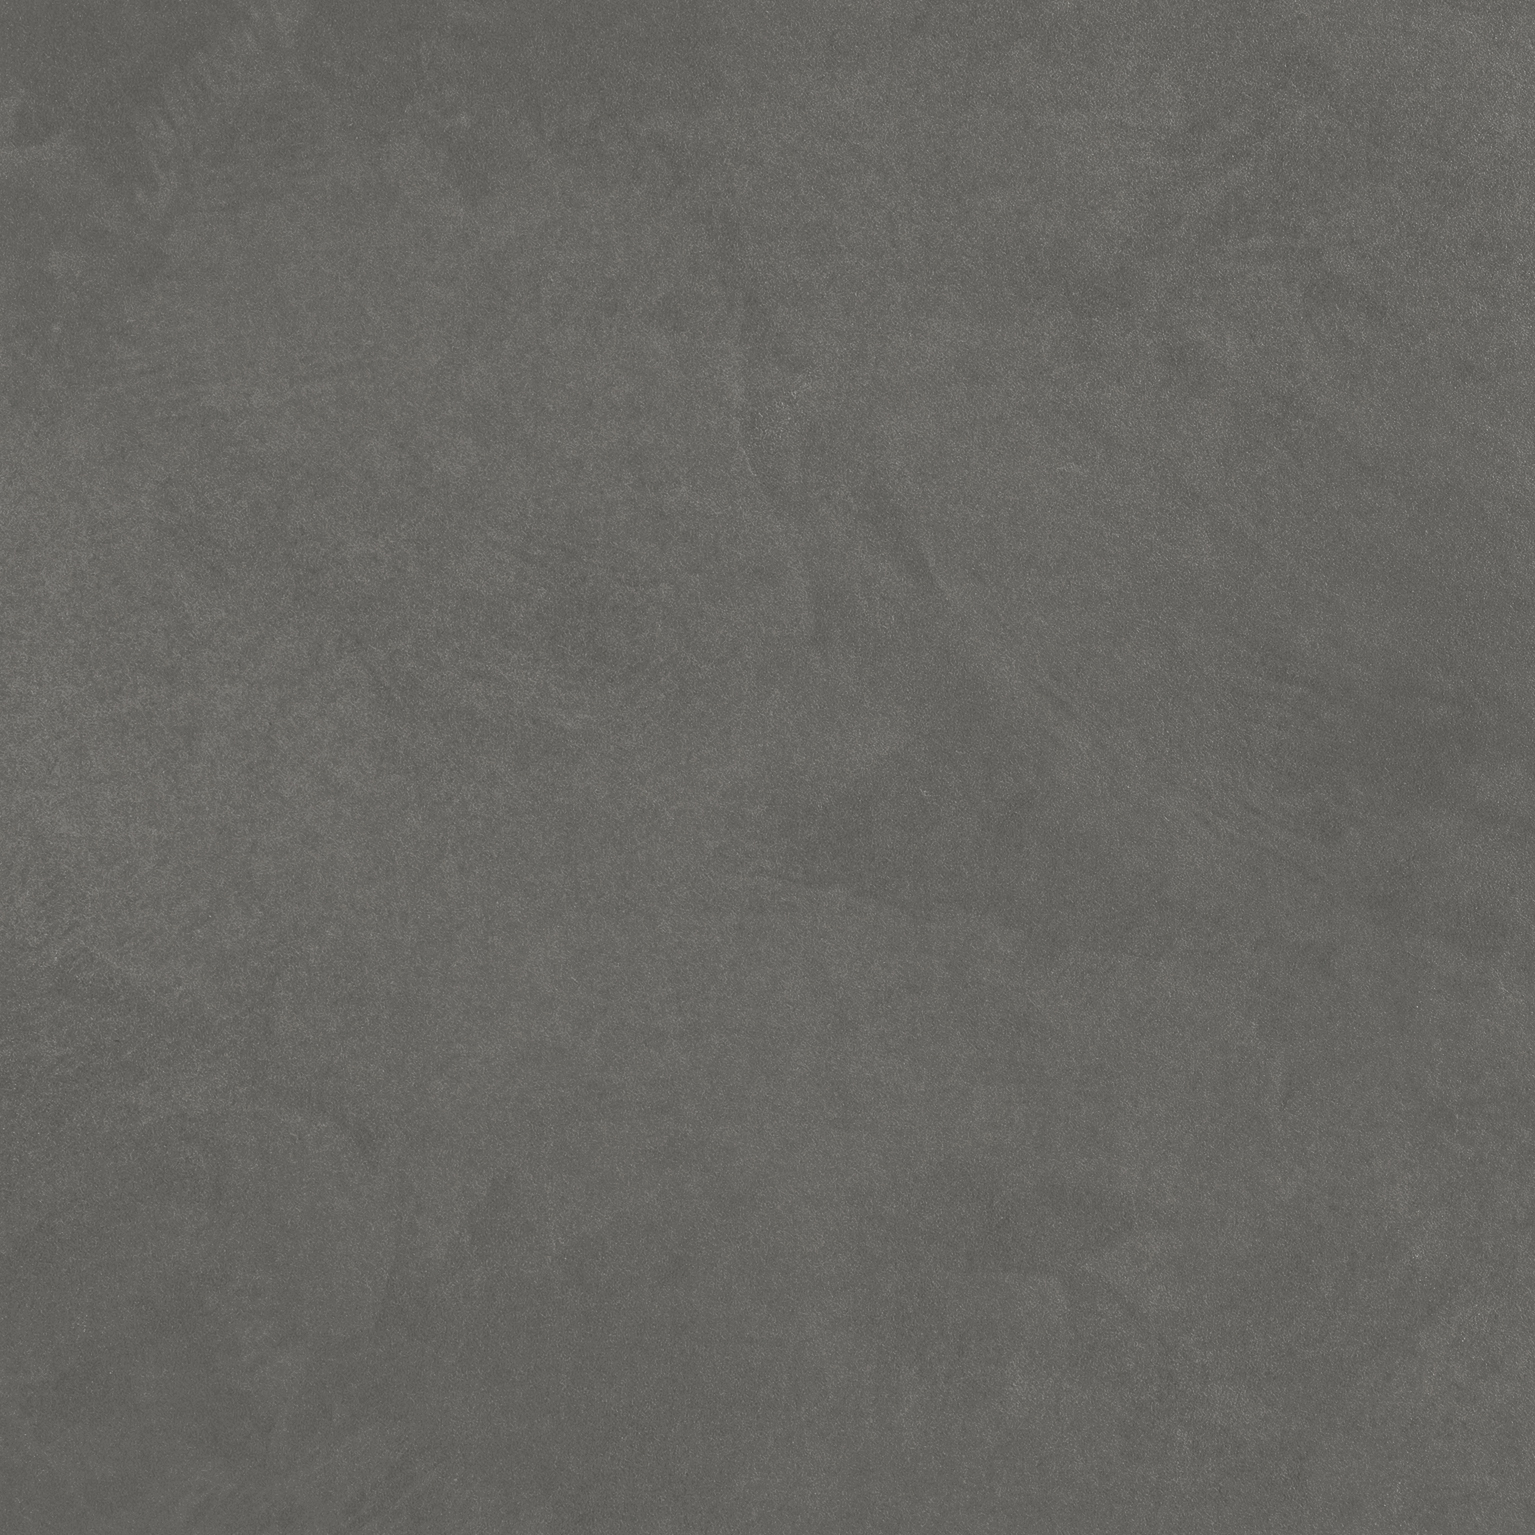 Unicom Starker Seamless Project Cl_03 Naturale 7347 30x60cm rectified 10mm